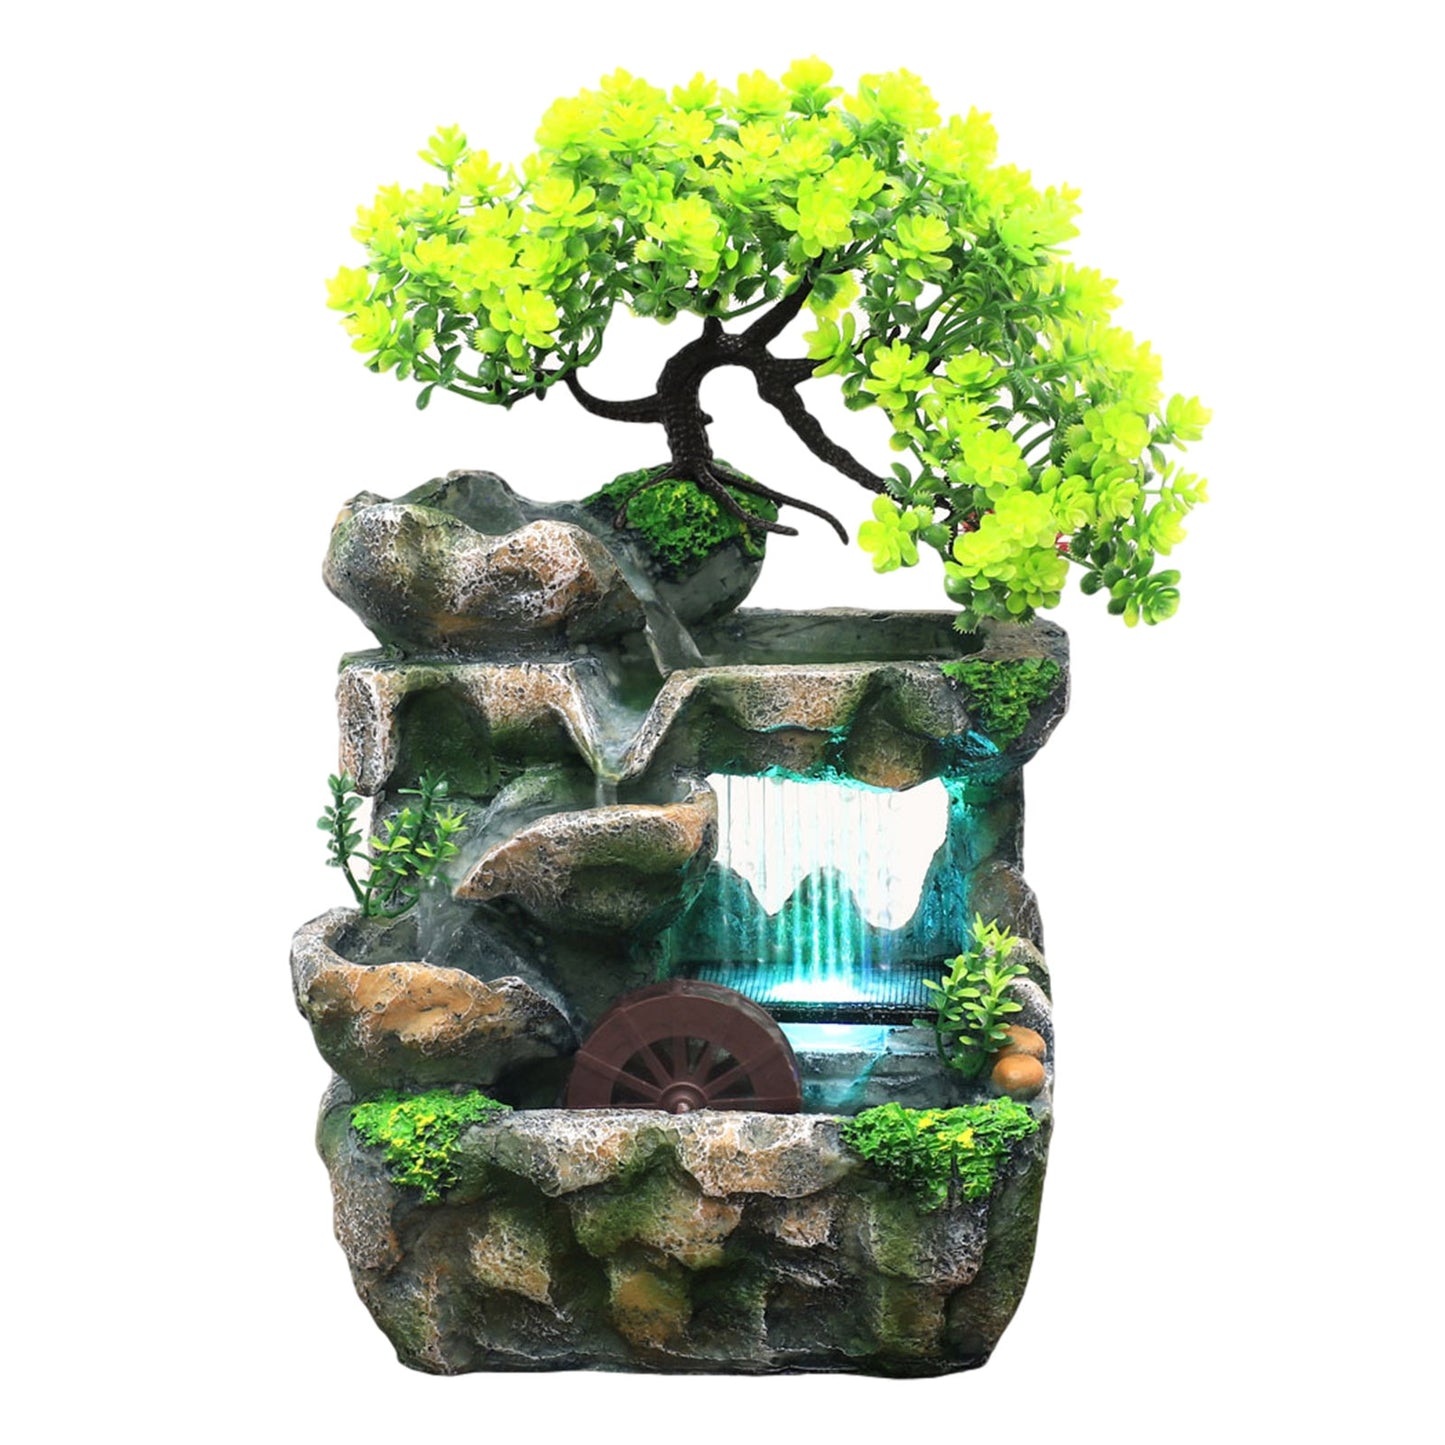 Elegant Decorative Water Fountains for Your Home, Office, or Garden